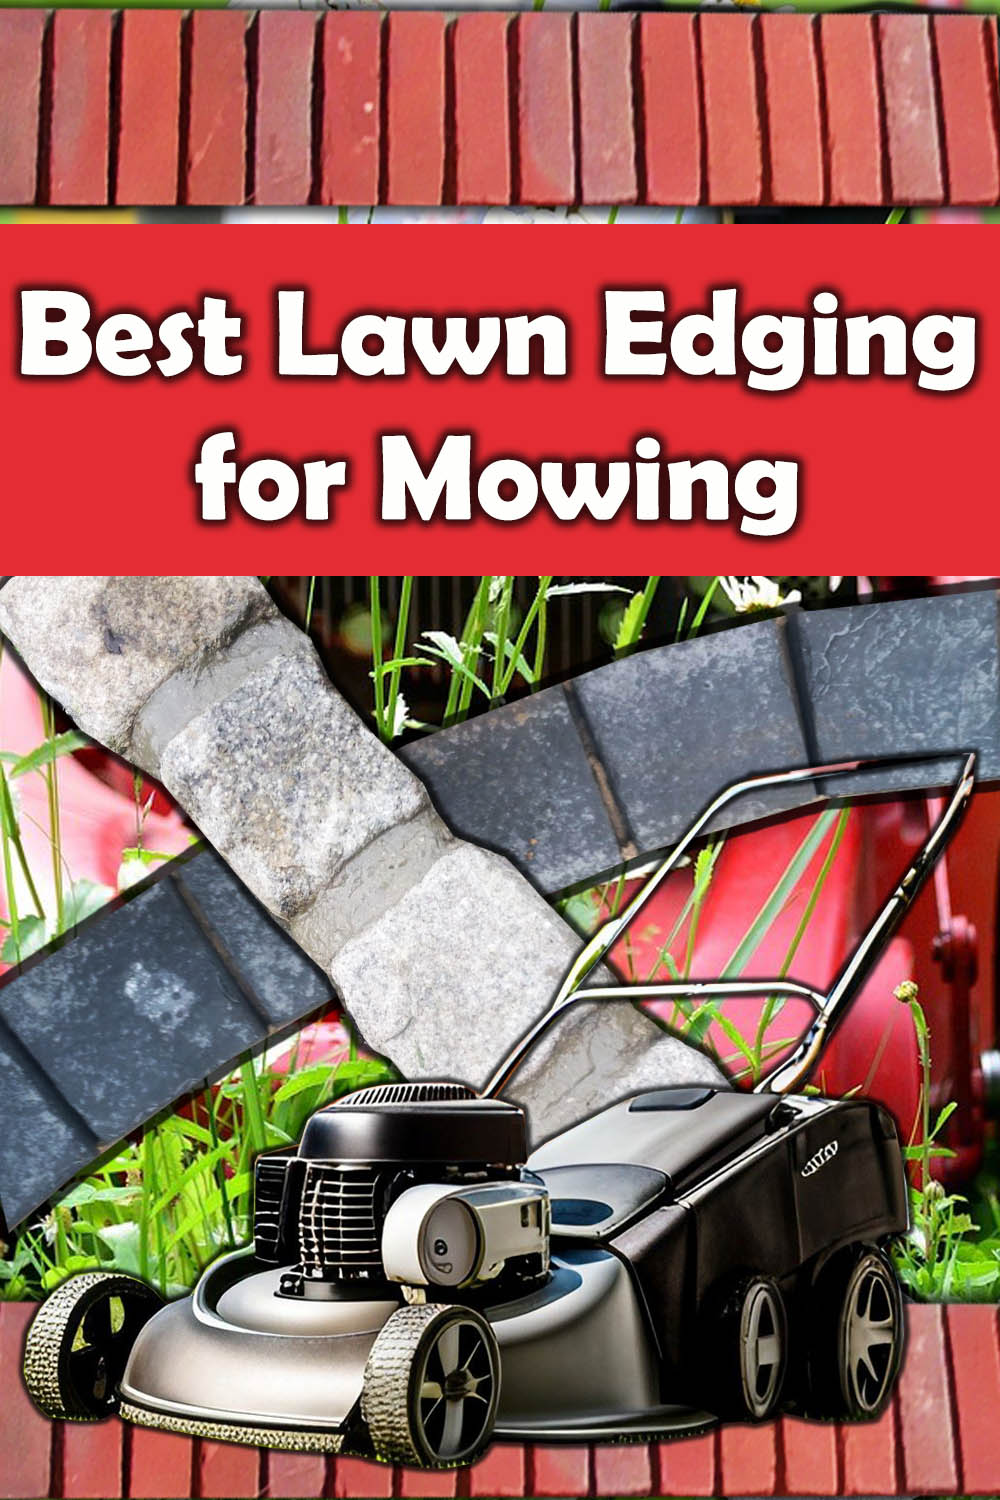 Best edging for mowing